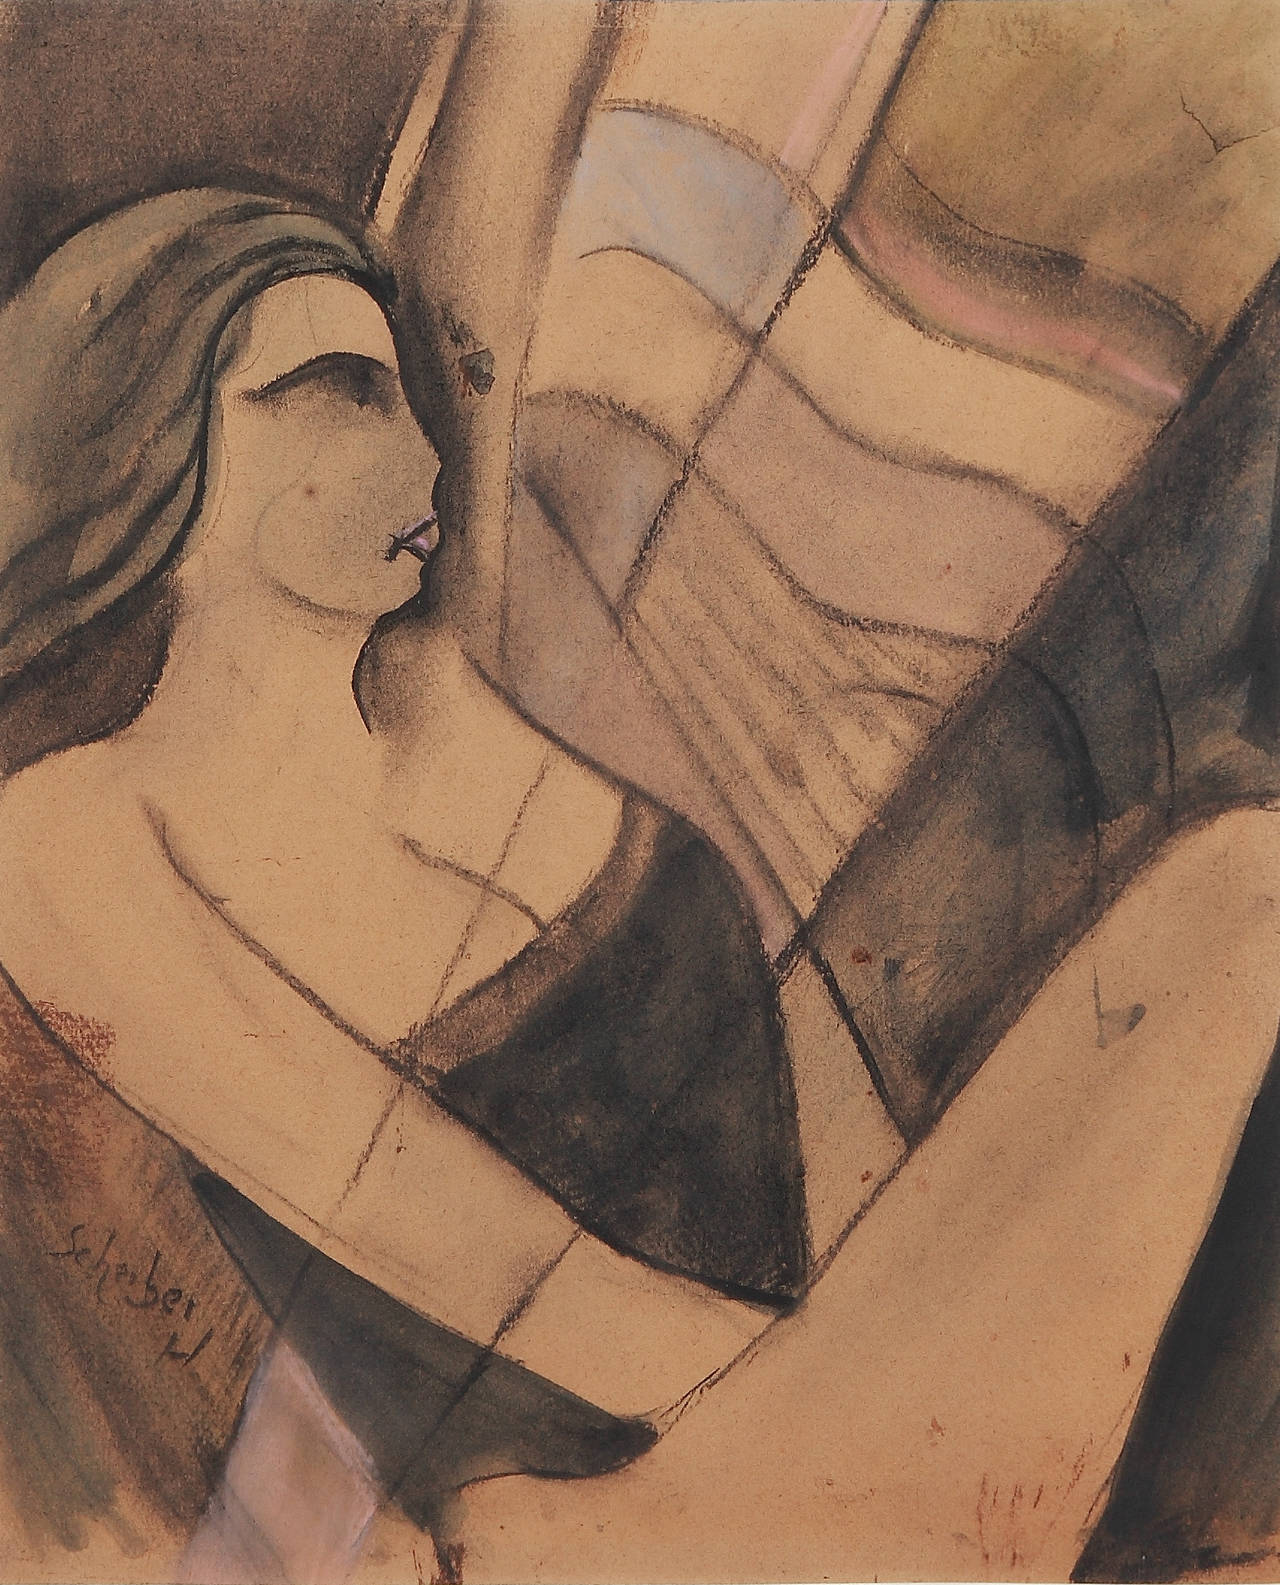 Pastel and carbon pencil on cardboard, ca. 1930 by Hugo Scheiber. Signed lower left: Scheiber H.
Dimensions: 14.96 x 12.99 in ( 38 x 33 cm ), Framed: 19.69 x 15.75 in ( 50 x 40 cm )

Hugo Scheiber born 1873 Budapest - he died 1953 in Budapest. A